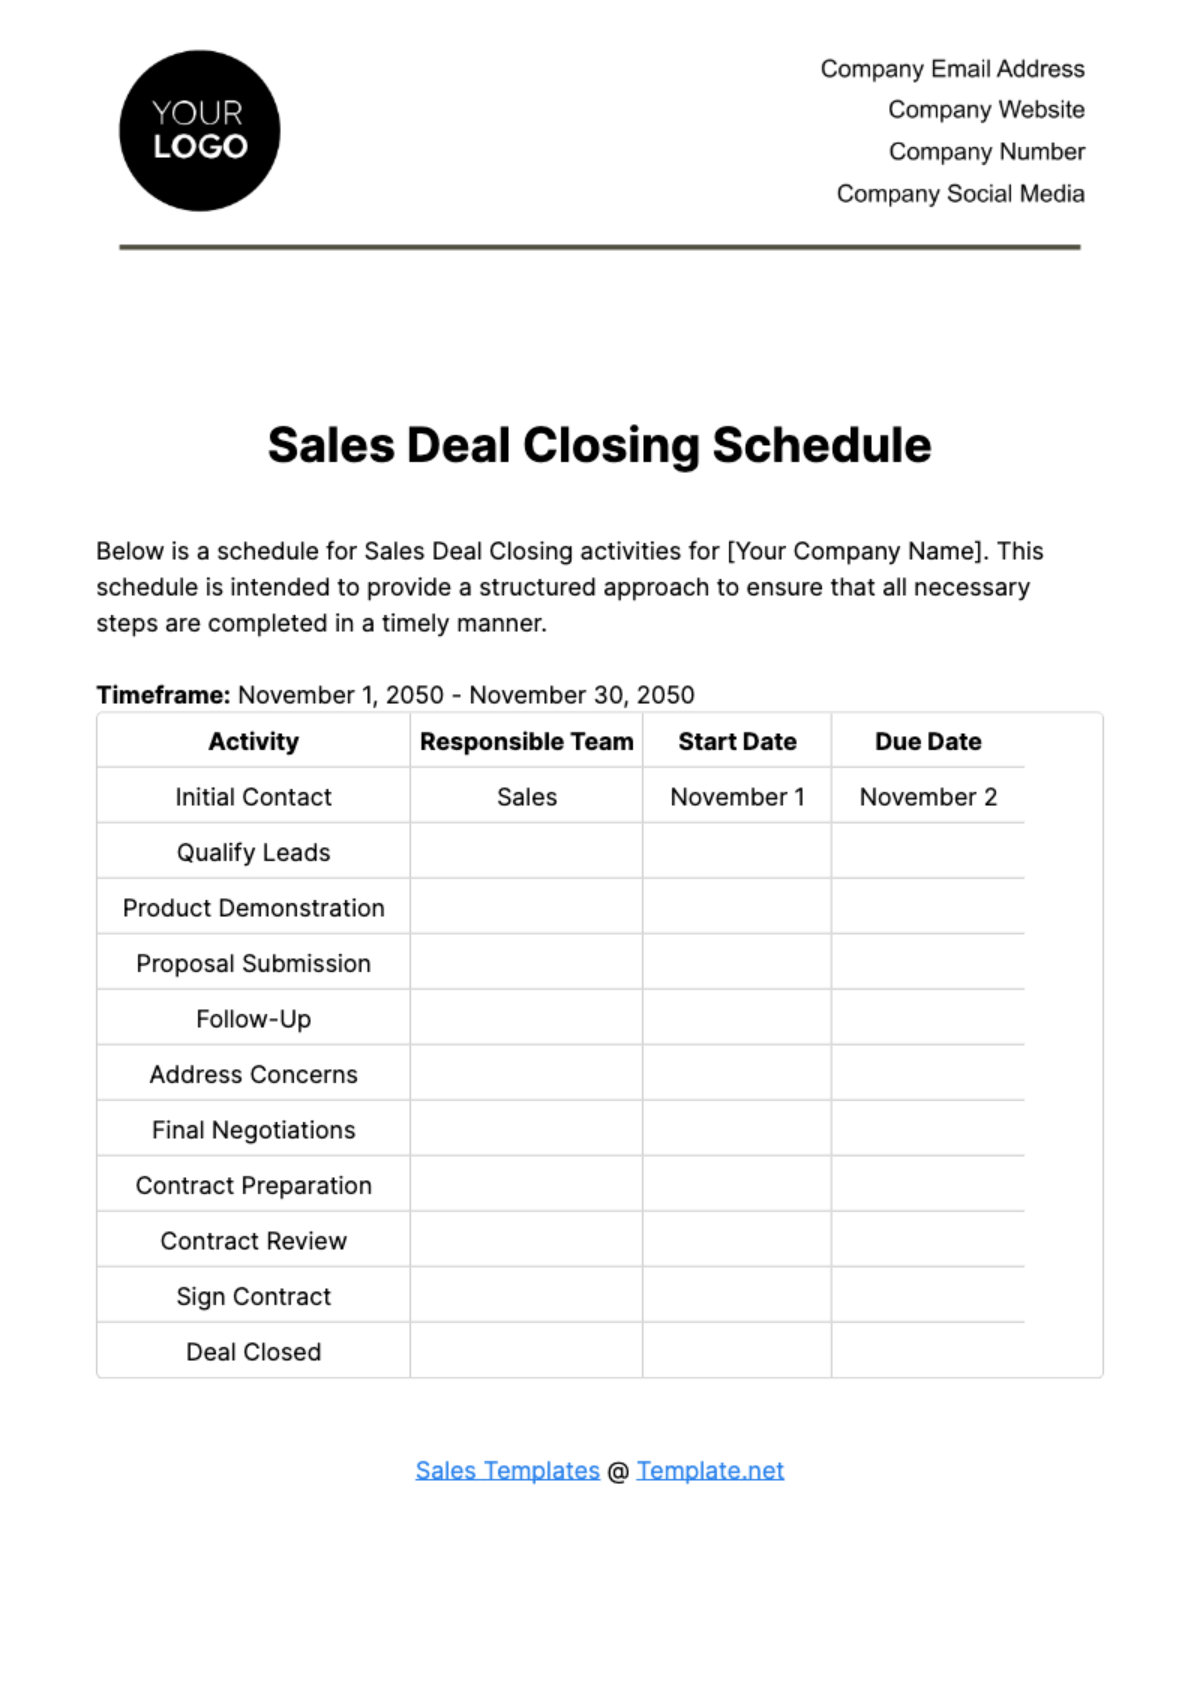 Free Sales Deal Closing Schedule Template